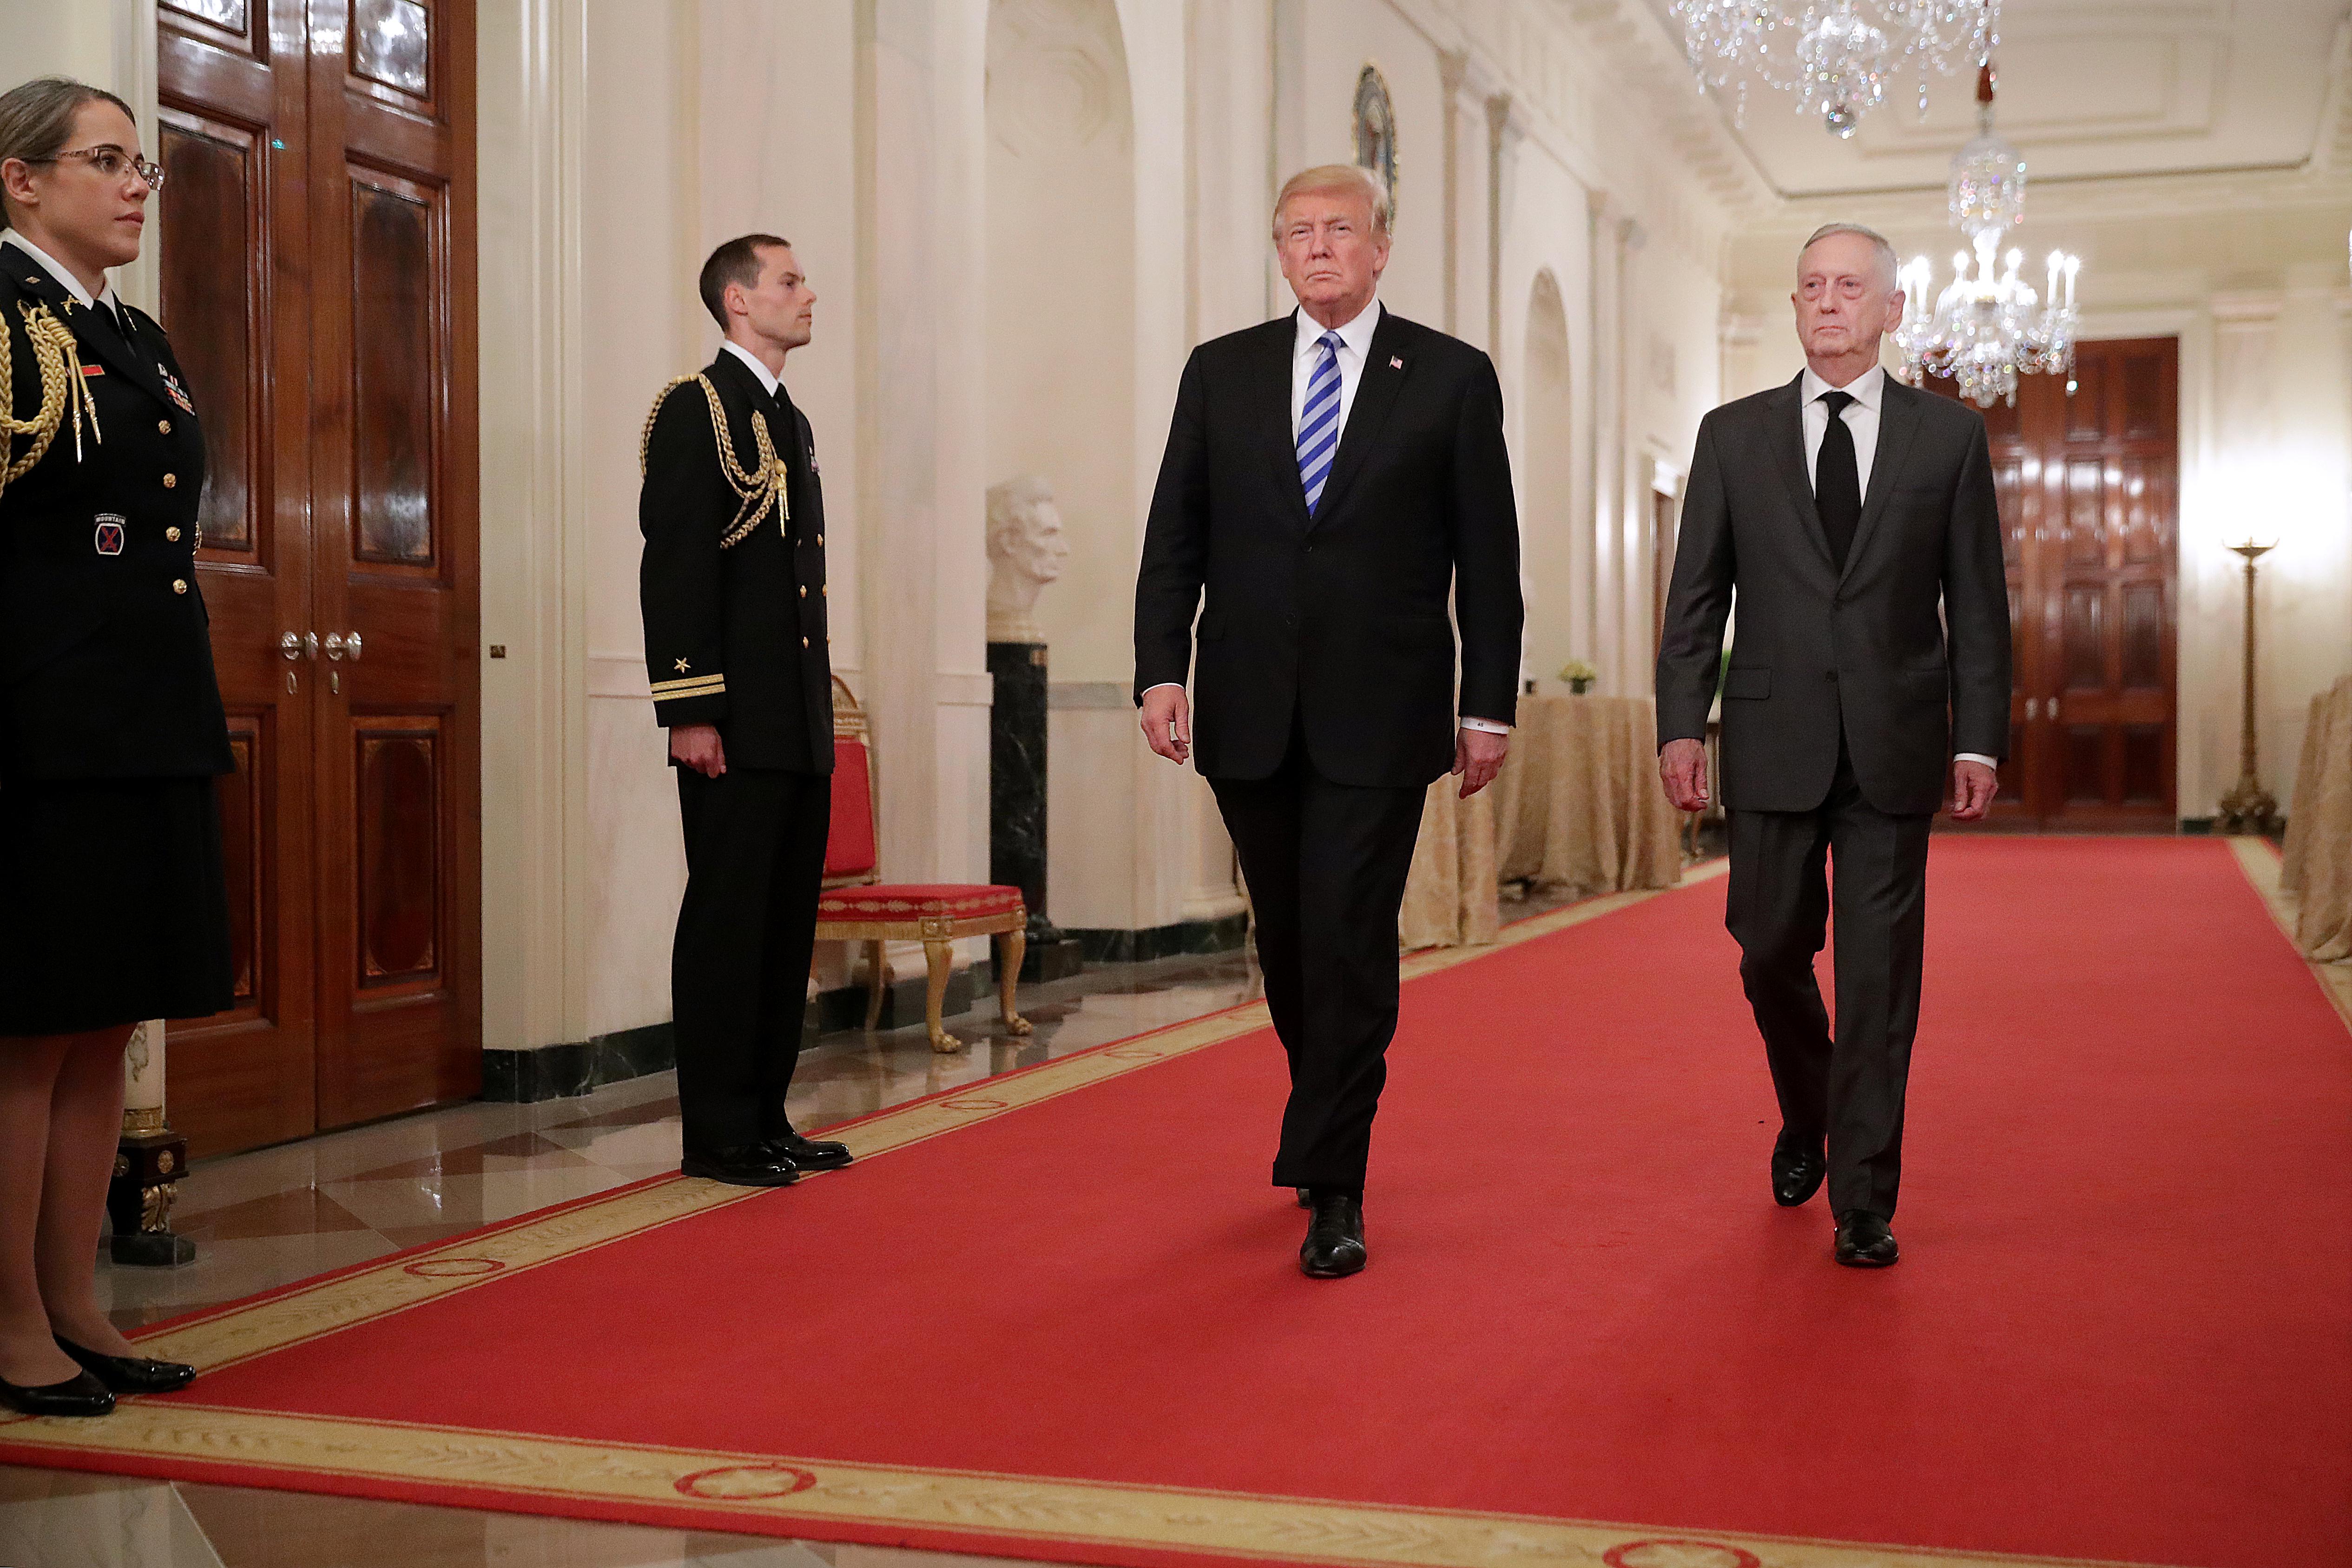 U.S. President Donald Trump (L) and Defense Secretary James Mattis arrive for an event commemorating the 35th anniversary of attack on the Beirut Barracks in the East Room of the White House October 25, 2018.